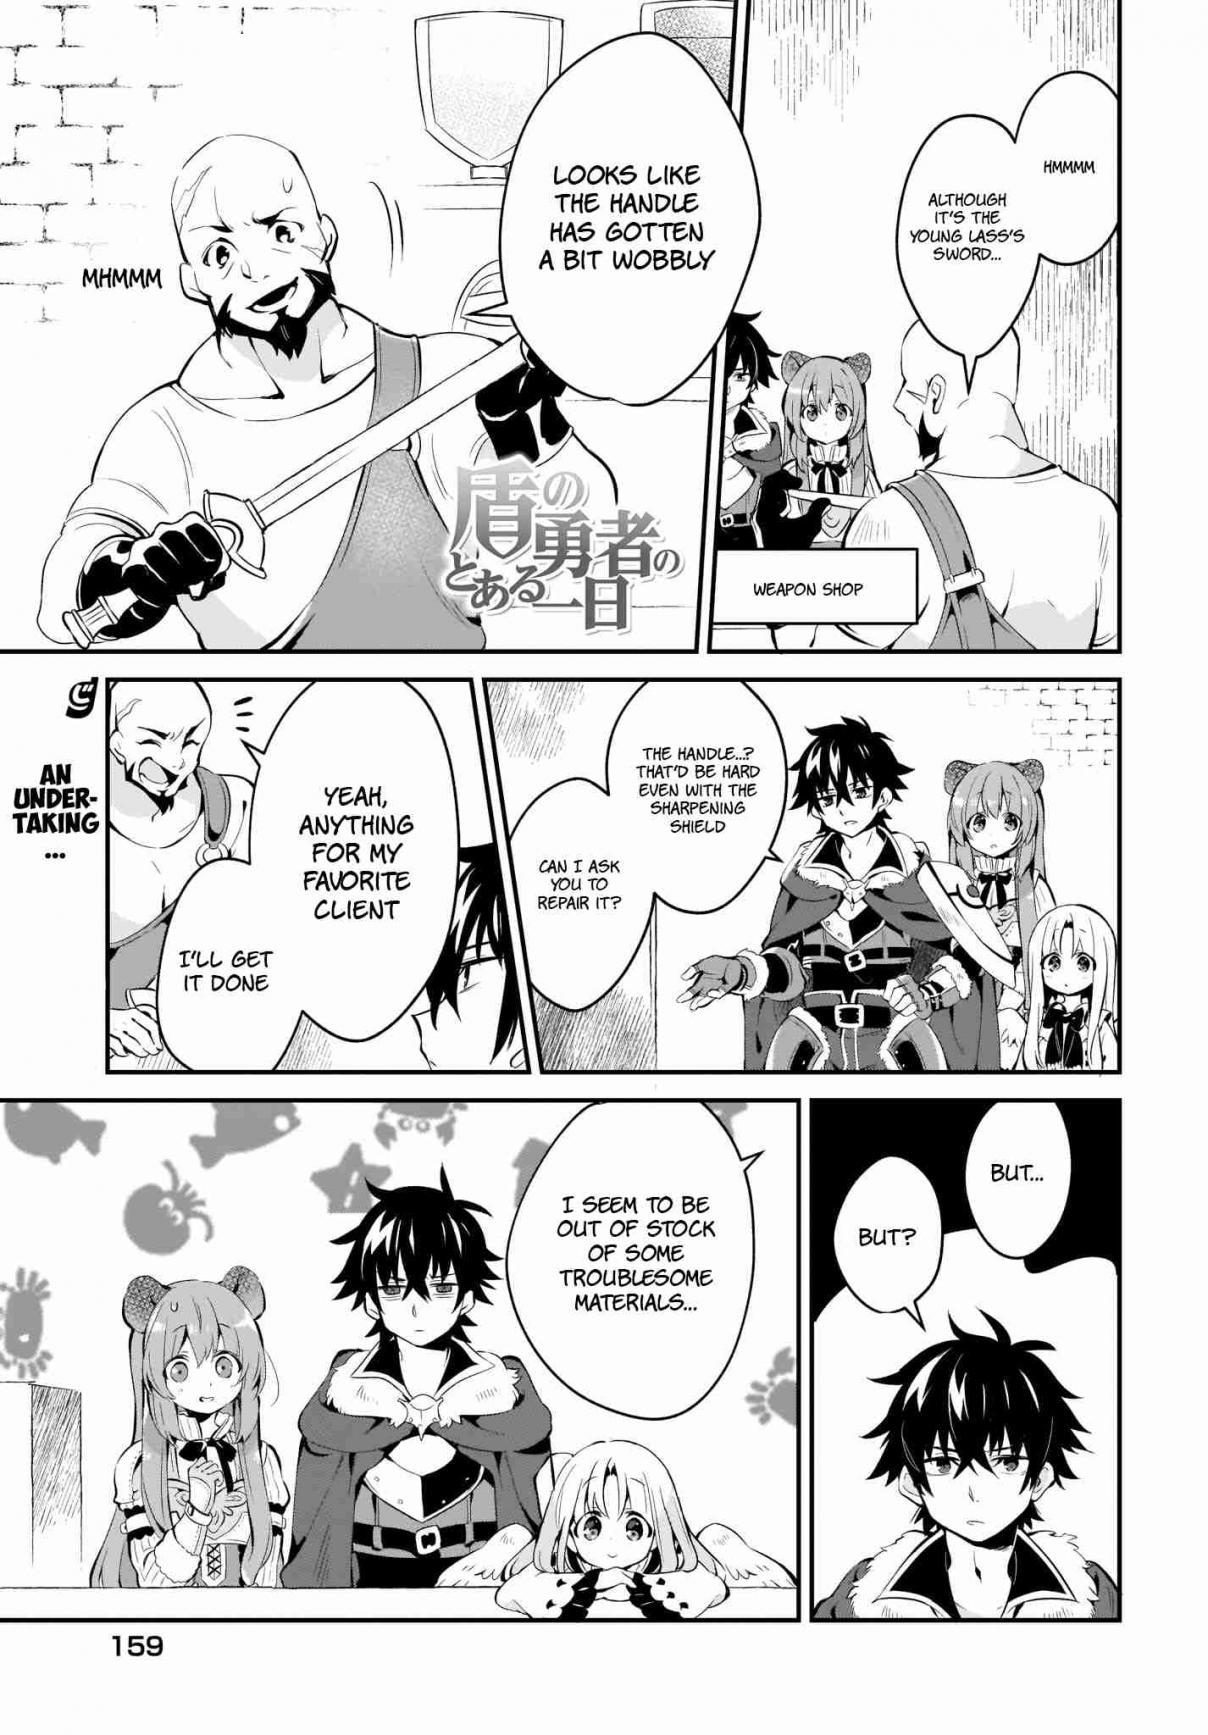 A Day in the Life of the Shield Hero Vol. 1 Ch. 3